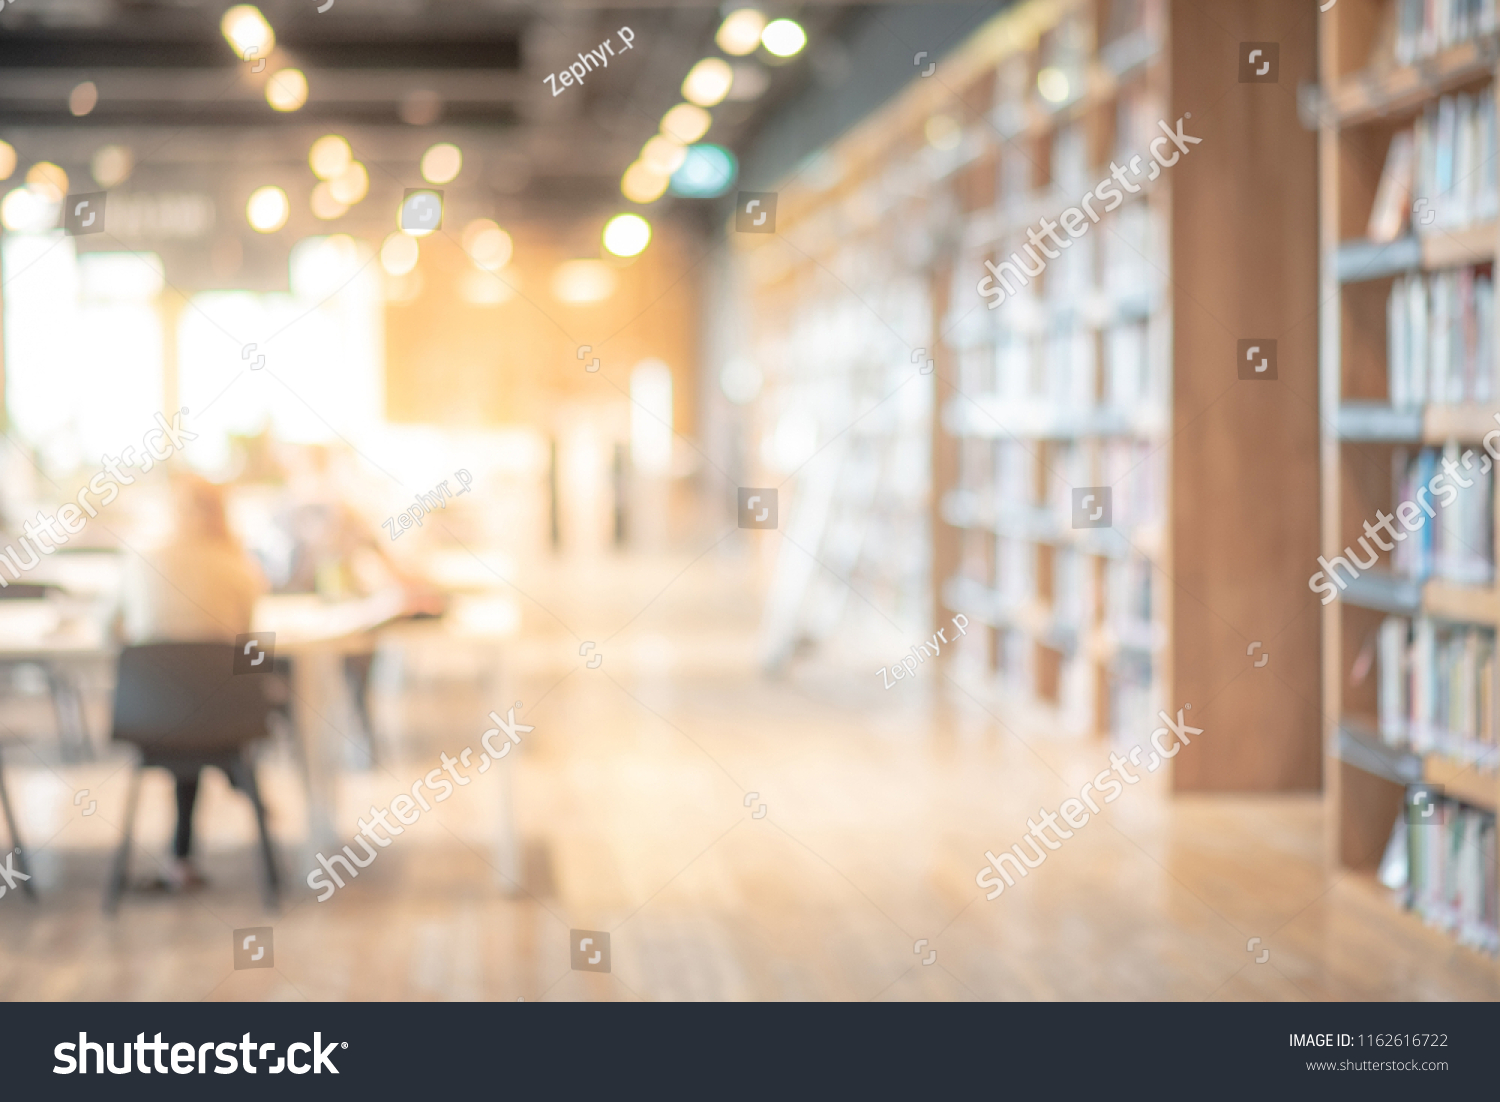 Abstract blurred empty college library interior space. Blurry classroom with bookshelves by defocused effect. use for background or backdrop in book shop business or education resources concepts #1162616722